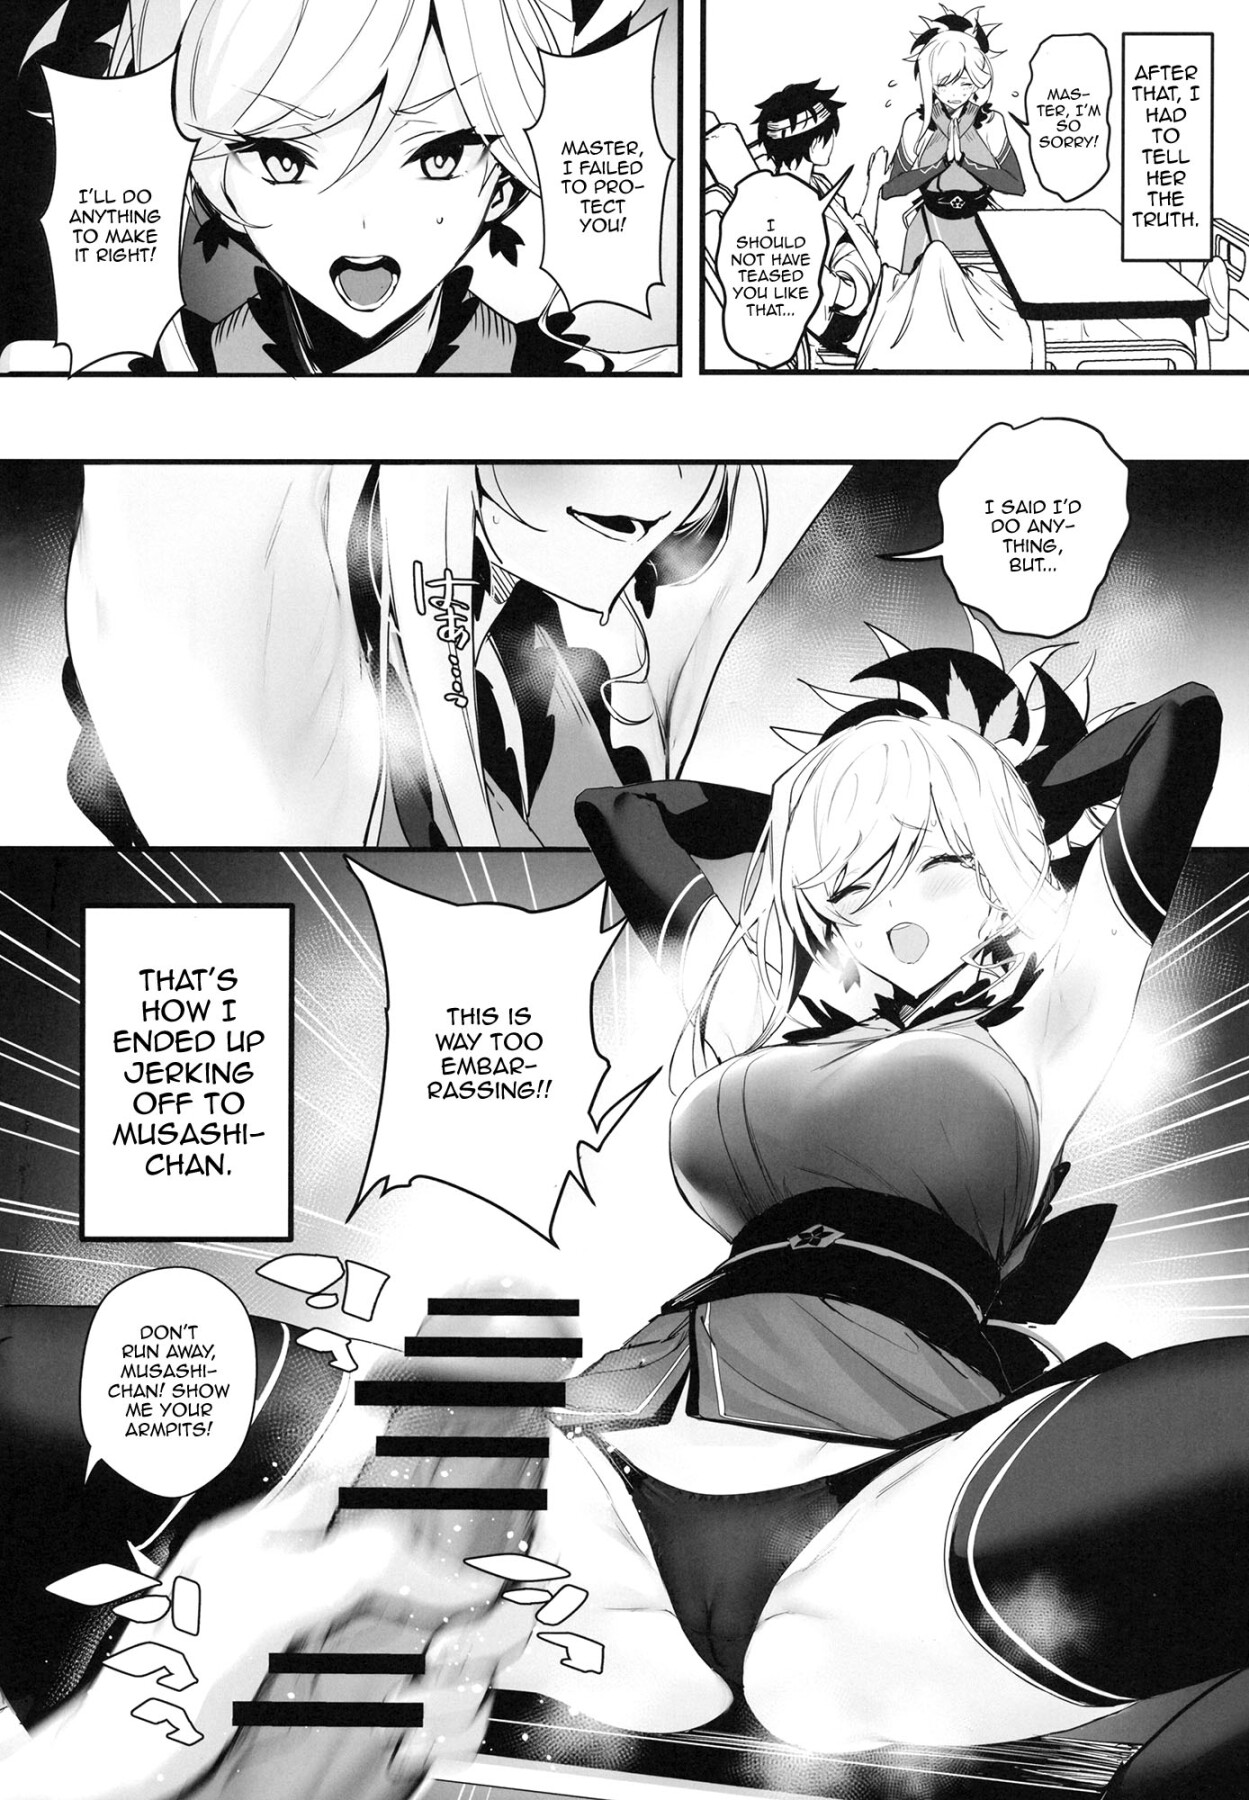 Hentai Manga Comic-ServaLove! VOL. 02 A Late-Blooming Musashi-chan in Love is Defeated by Nipple Torture and Lovey-Dovey Sex-Read-3